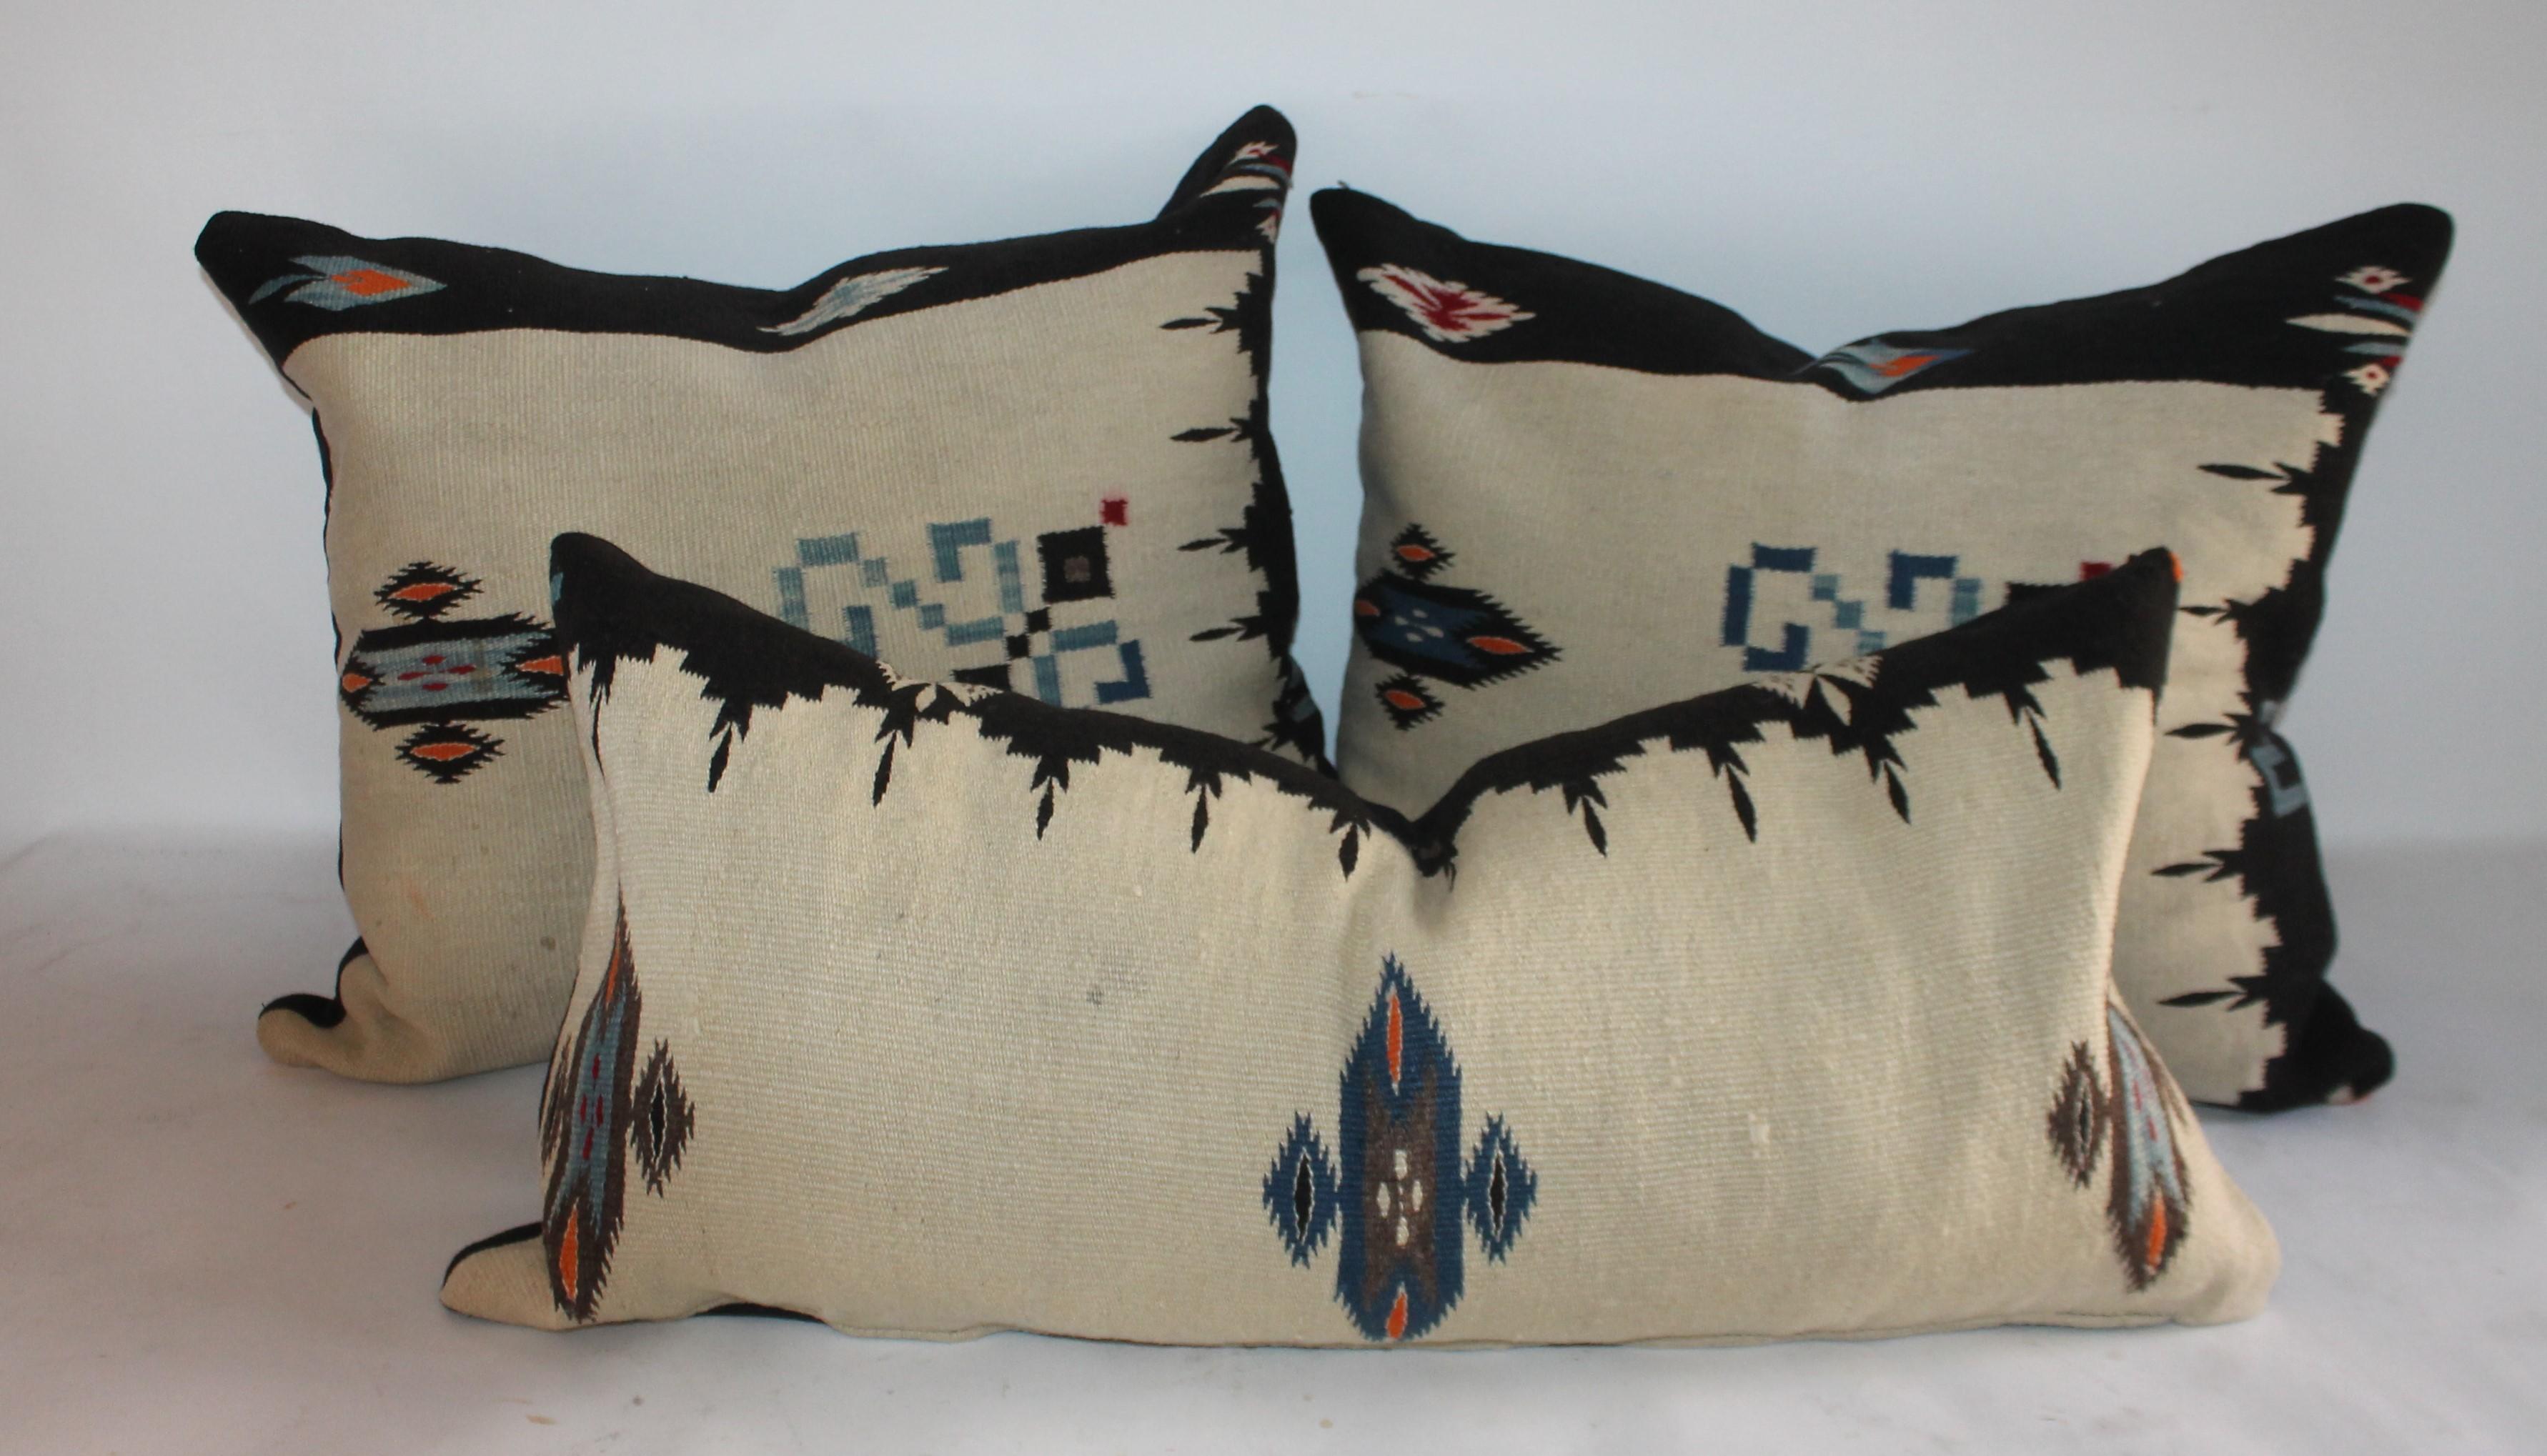 These amazing Indian weaving pillows are in fantastic condition. Some have minor age spots consistent from age and use. Selling individually @ 895.00 each. Wecan give a group price as well. The backings are in cotton linen.
Bolster 15 x 31 inches